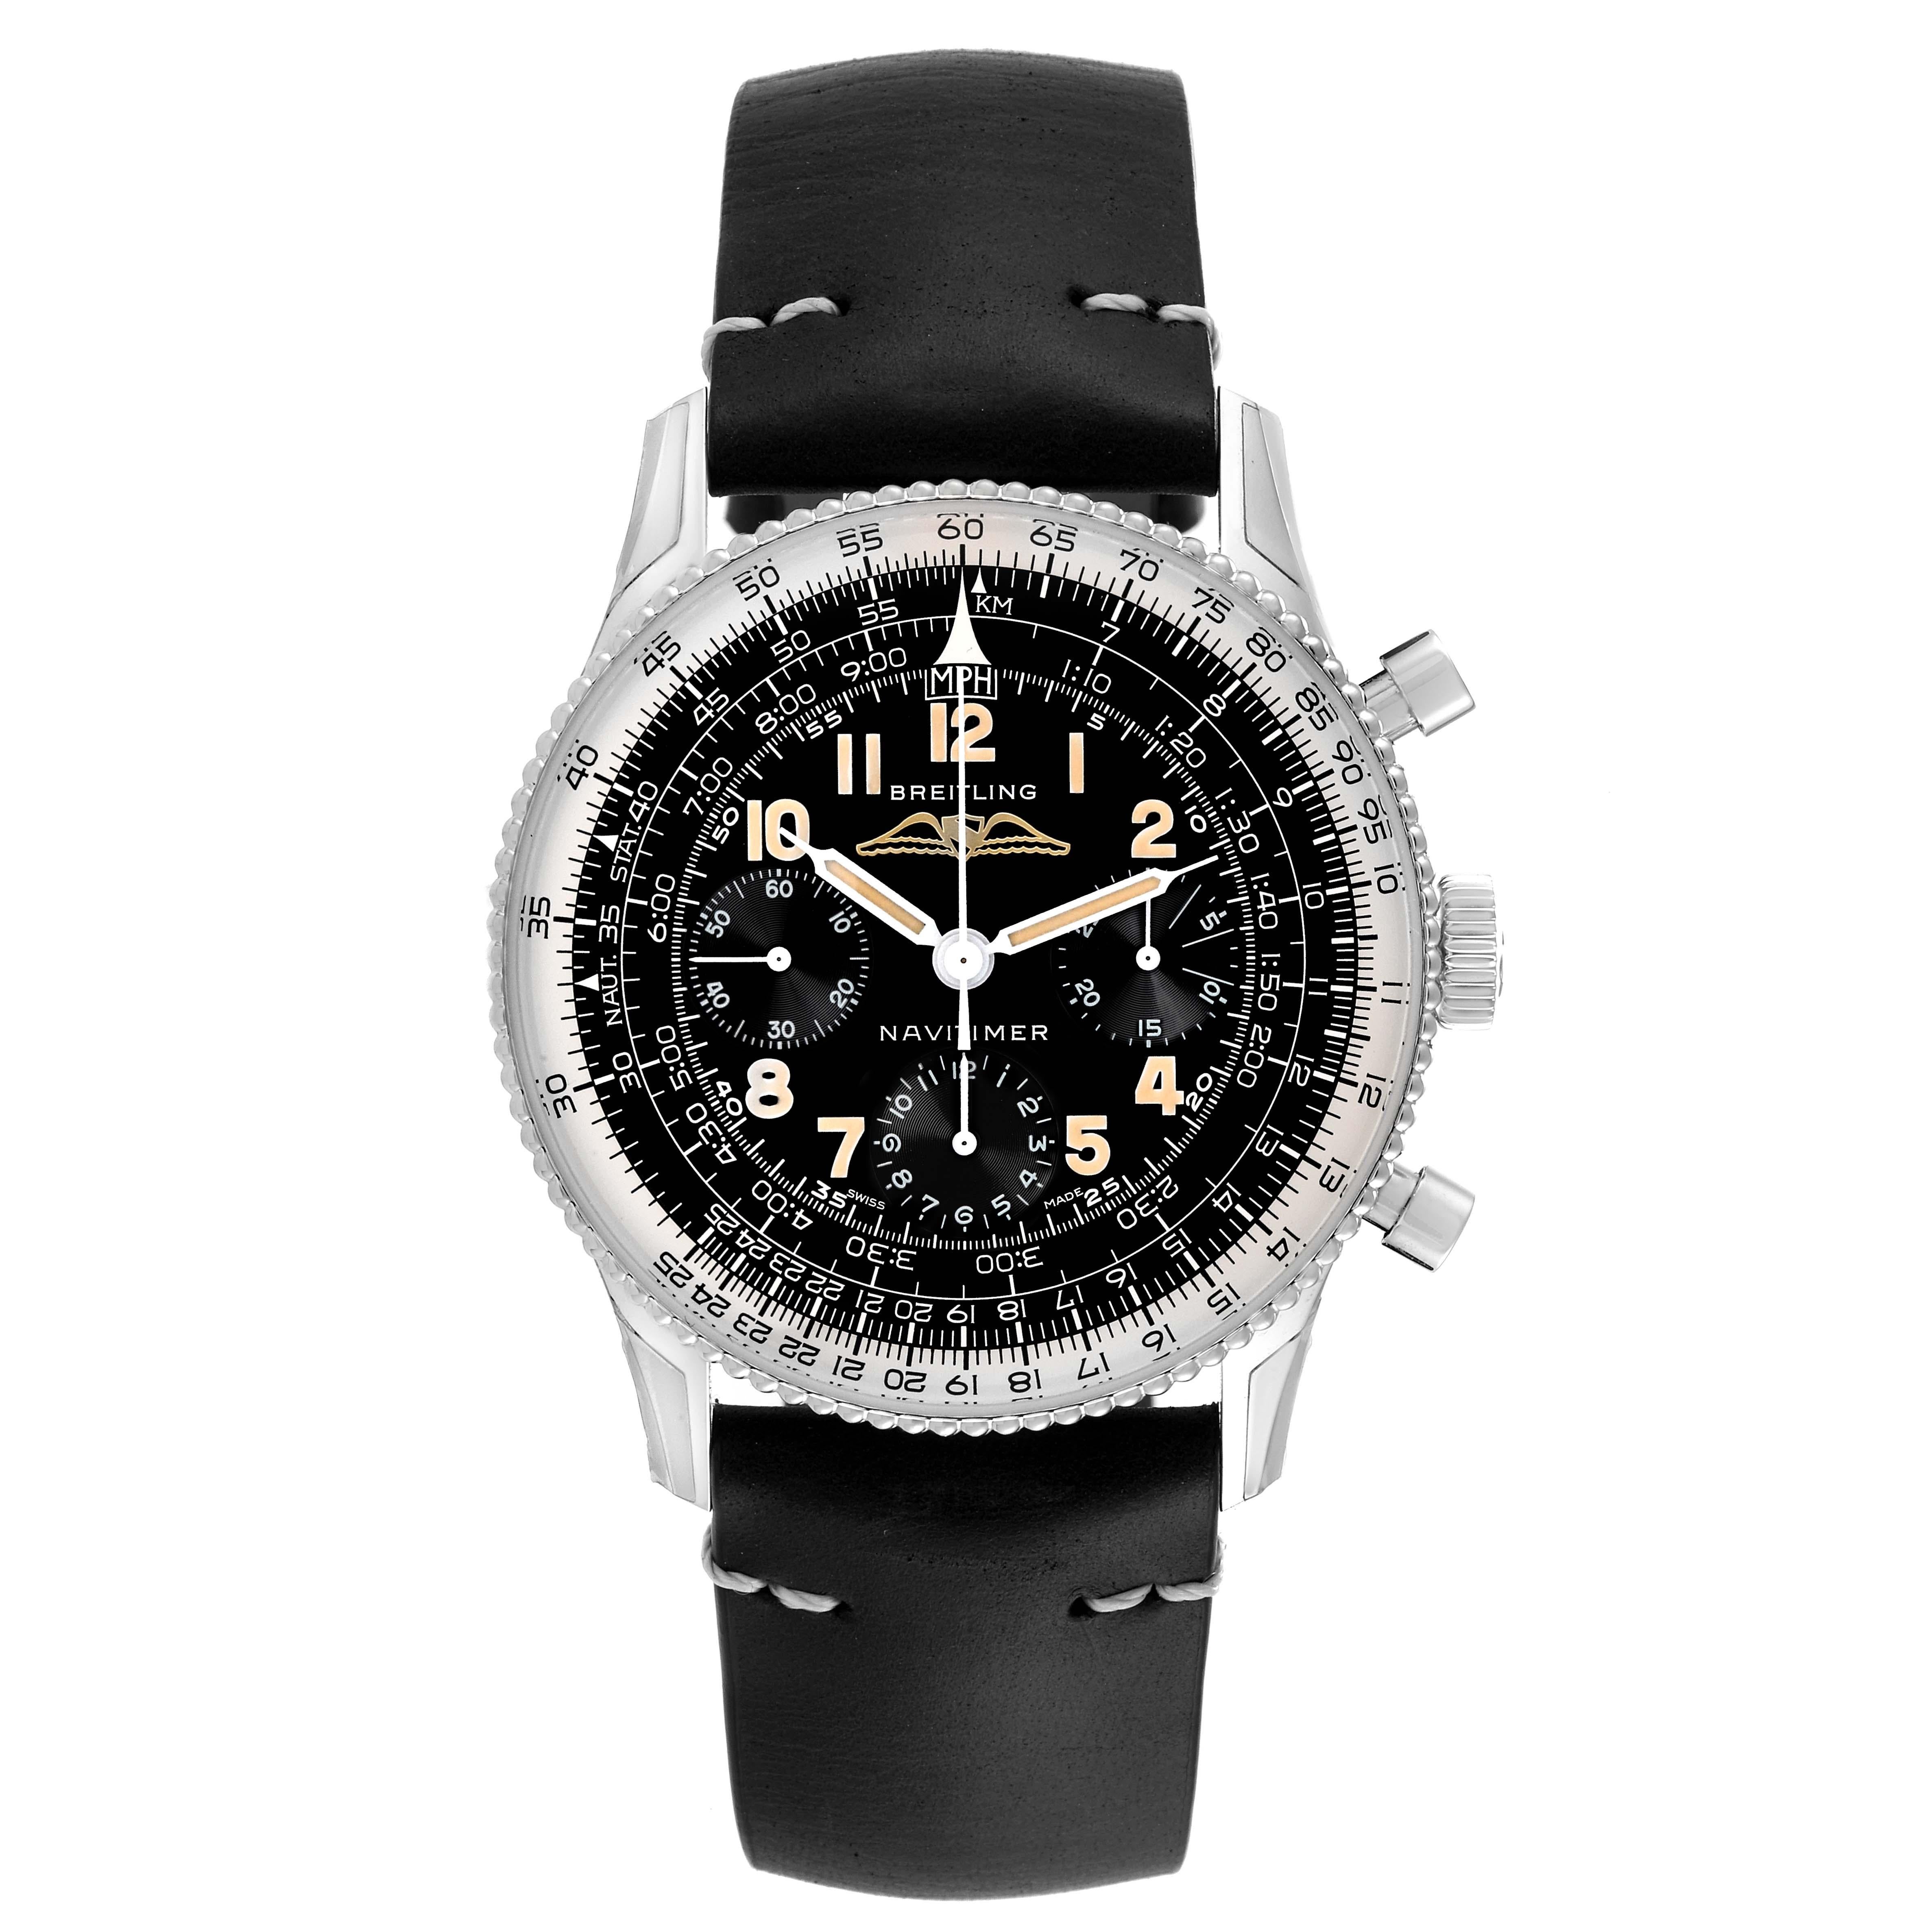 Breitling Navitimer Re-Edition Steel Mens Watch AB0910 Box Card. Mechanical hand-wound movement, Breitling Caliber B09. Stainless steel case 41 mm in diameter. Breitling logo on the crown. Stainless steel bidirectional rotating slide-rule bezel.